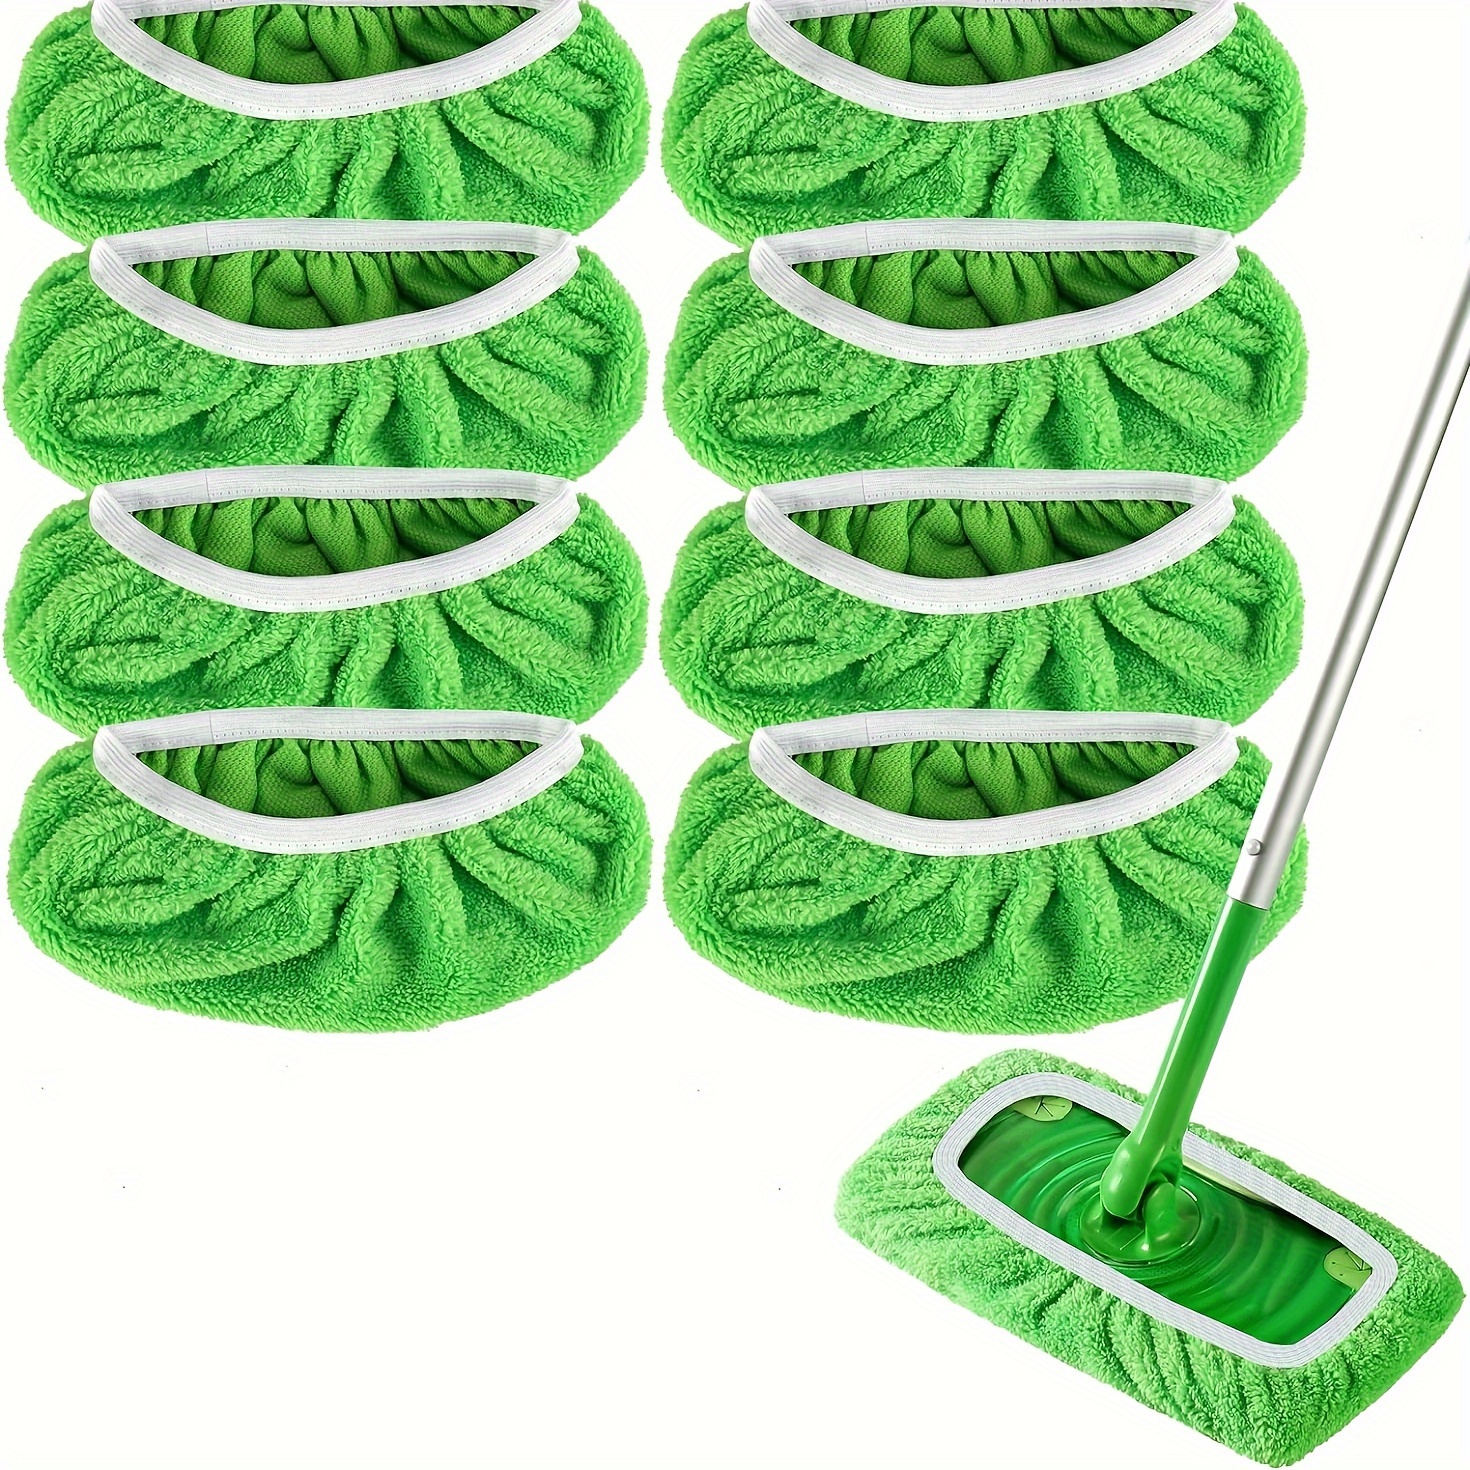  Reusable Pads Compatible with Swiffer Sweeper Mops - Washable  Microfiber Mop Pad Refills by Turbo - 12 Inch Floor Cleaning Mop Head Pads  Work Wet and Dry - 2 Pack : Health & Household